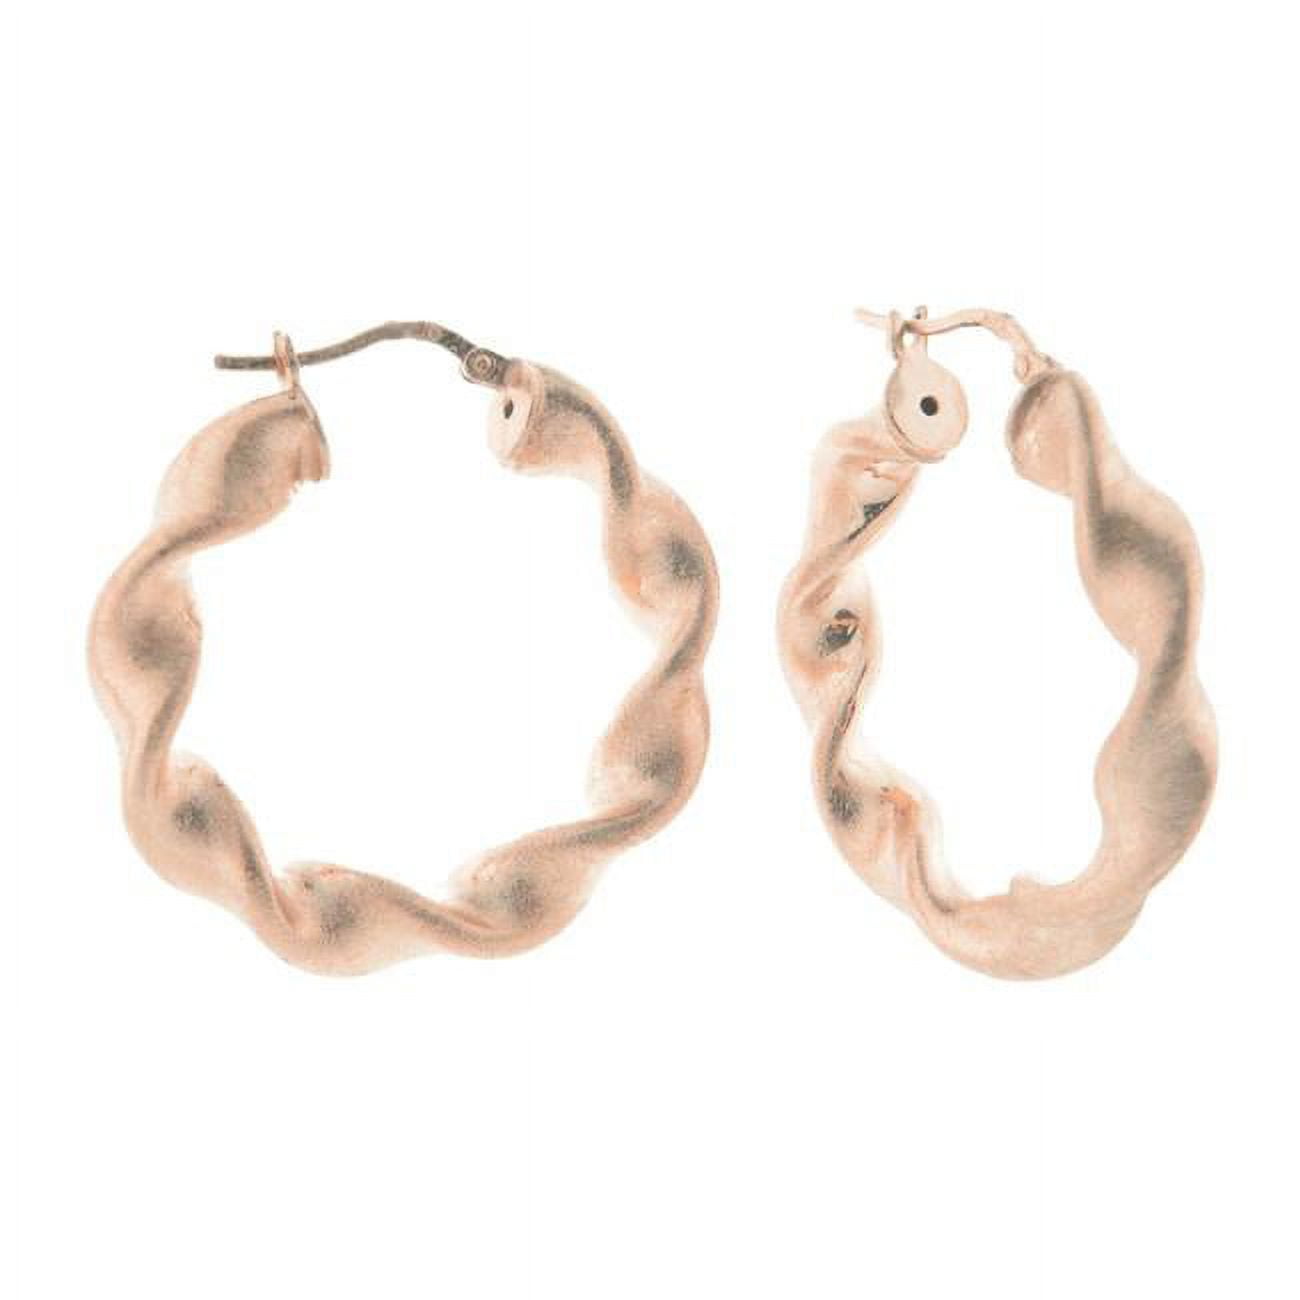 Picture of Fronay 405243P Satin Finish Twisted Hoop Earrings in Rose Gold Sterling Silver